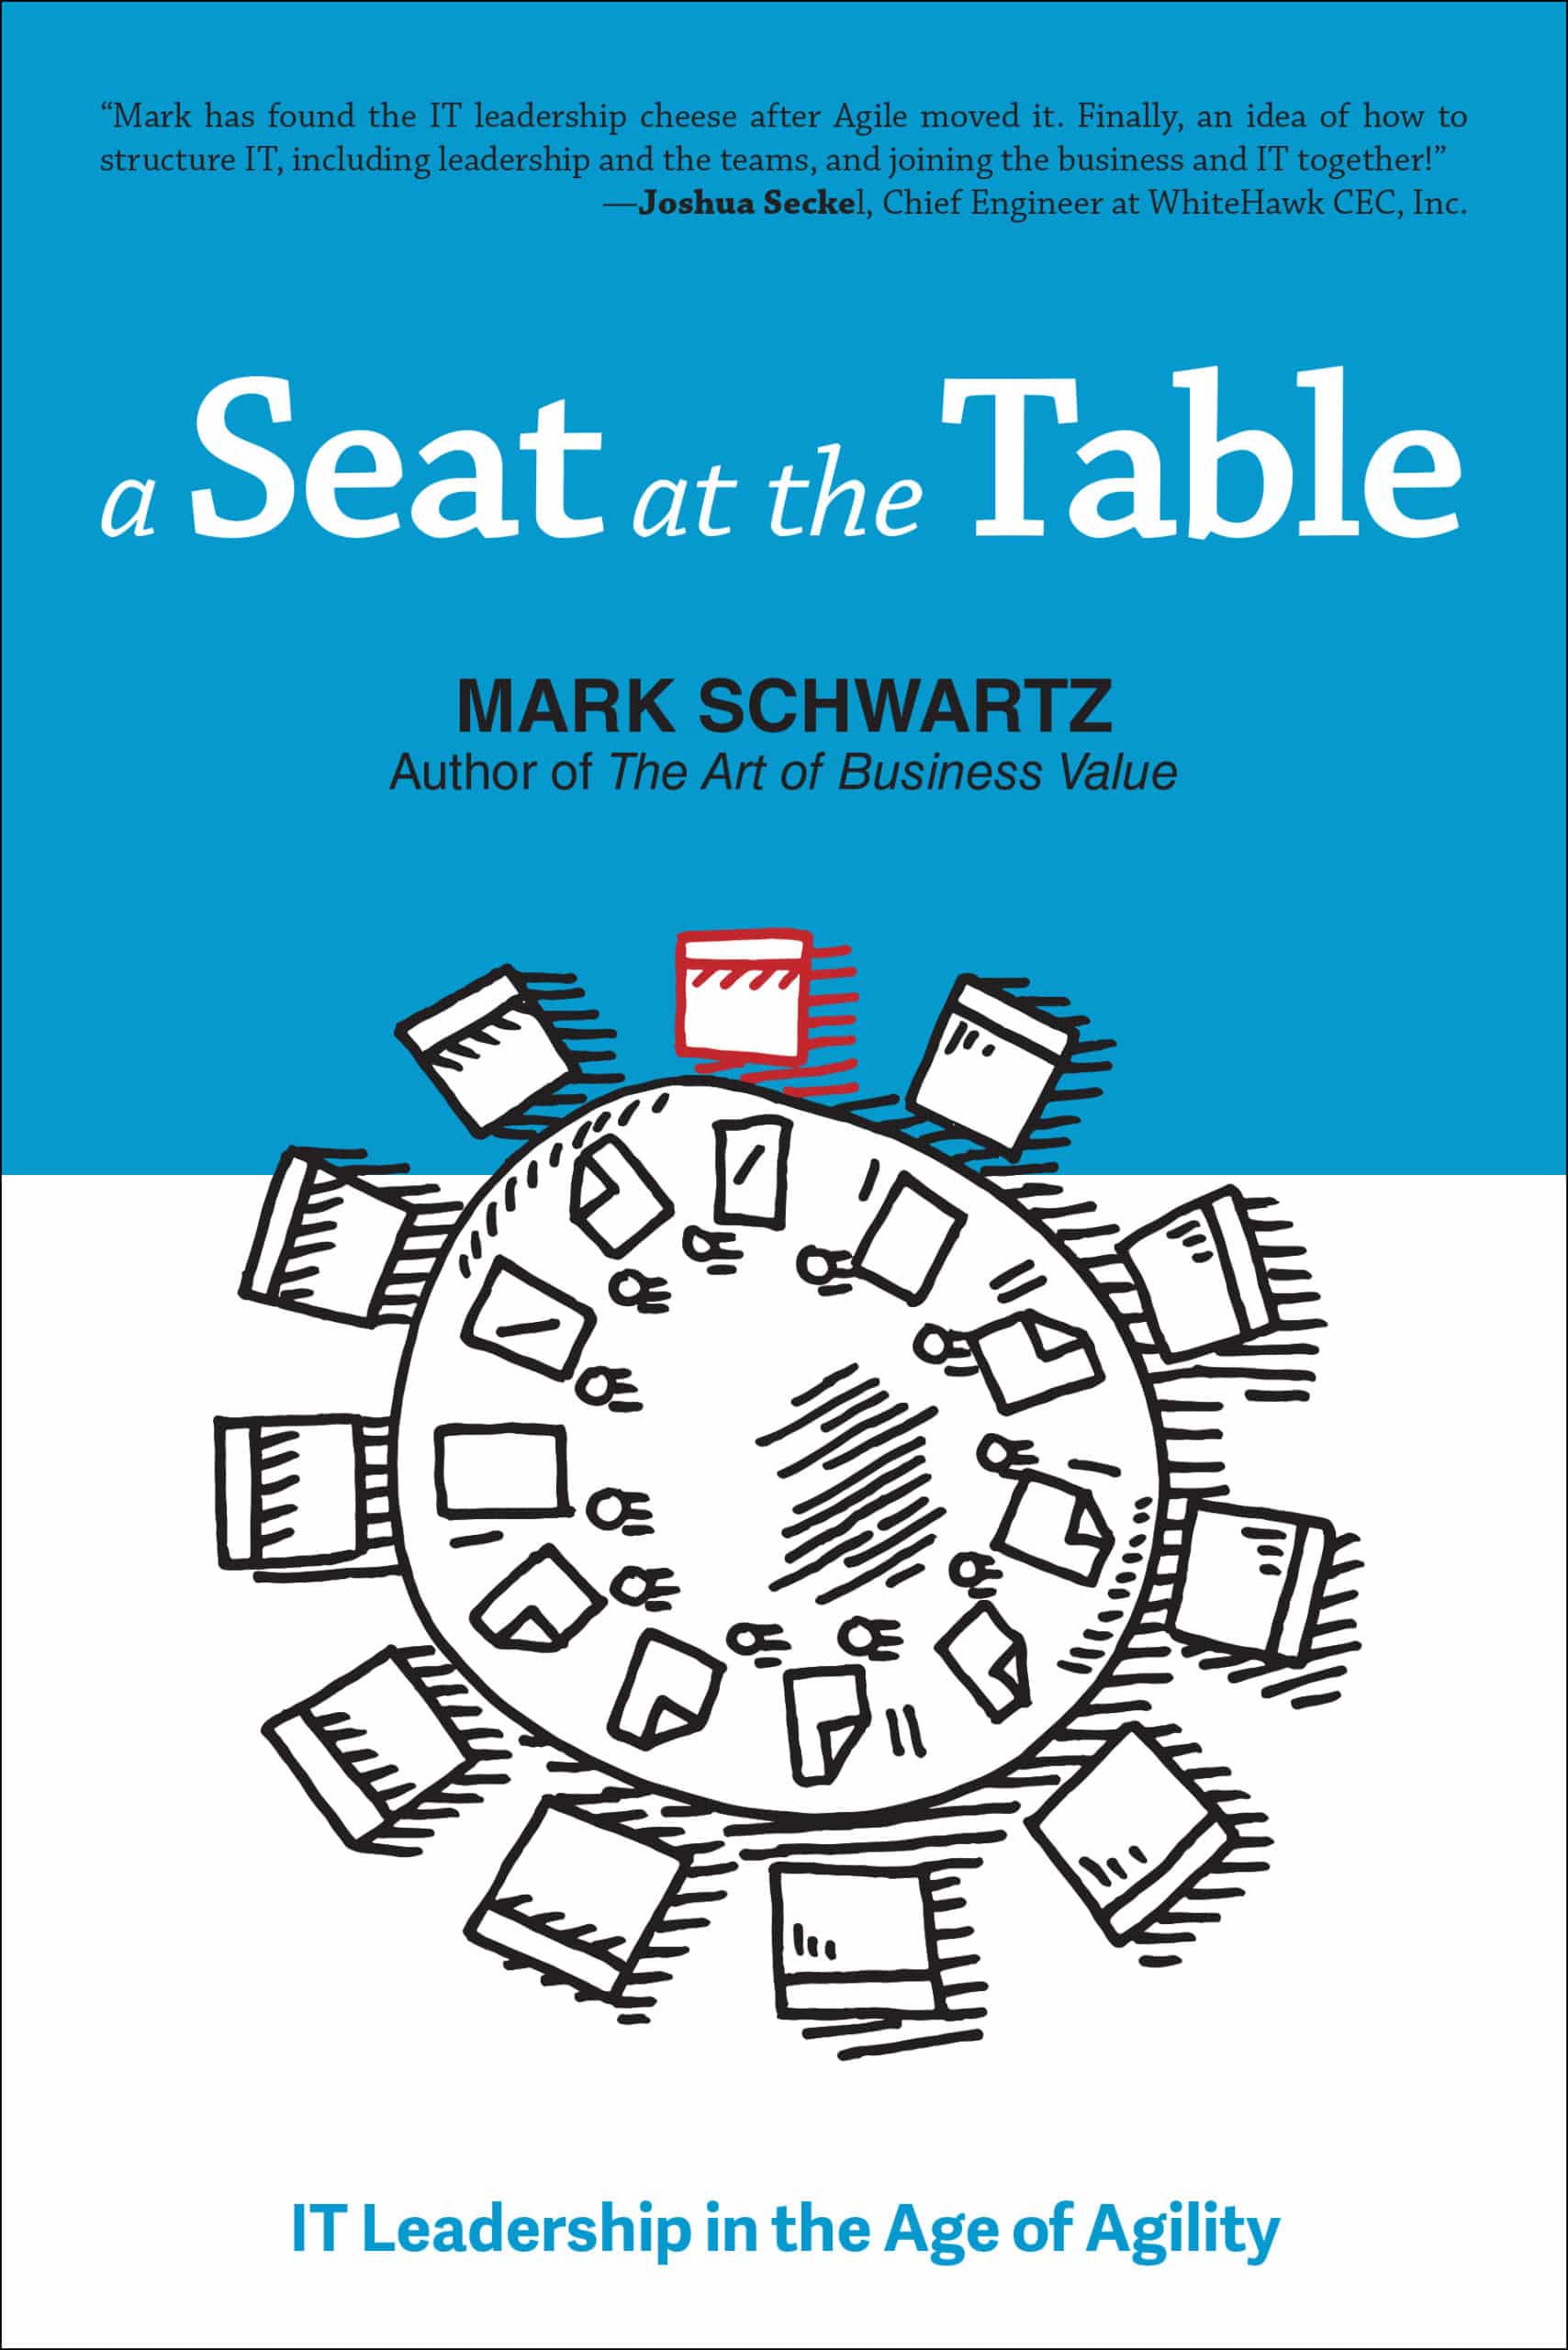 Cover of A Seat at the Table: IT Leadership in the Age of Agility by Mark Schwartz, which discusses the shift from requirements to outcomes in IT leadership.